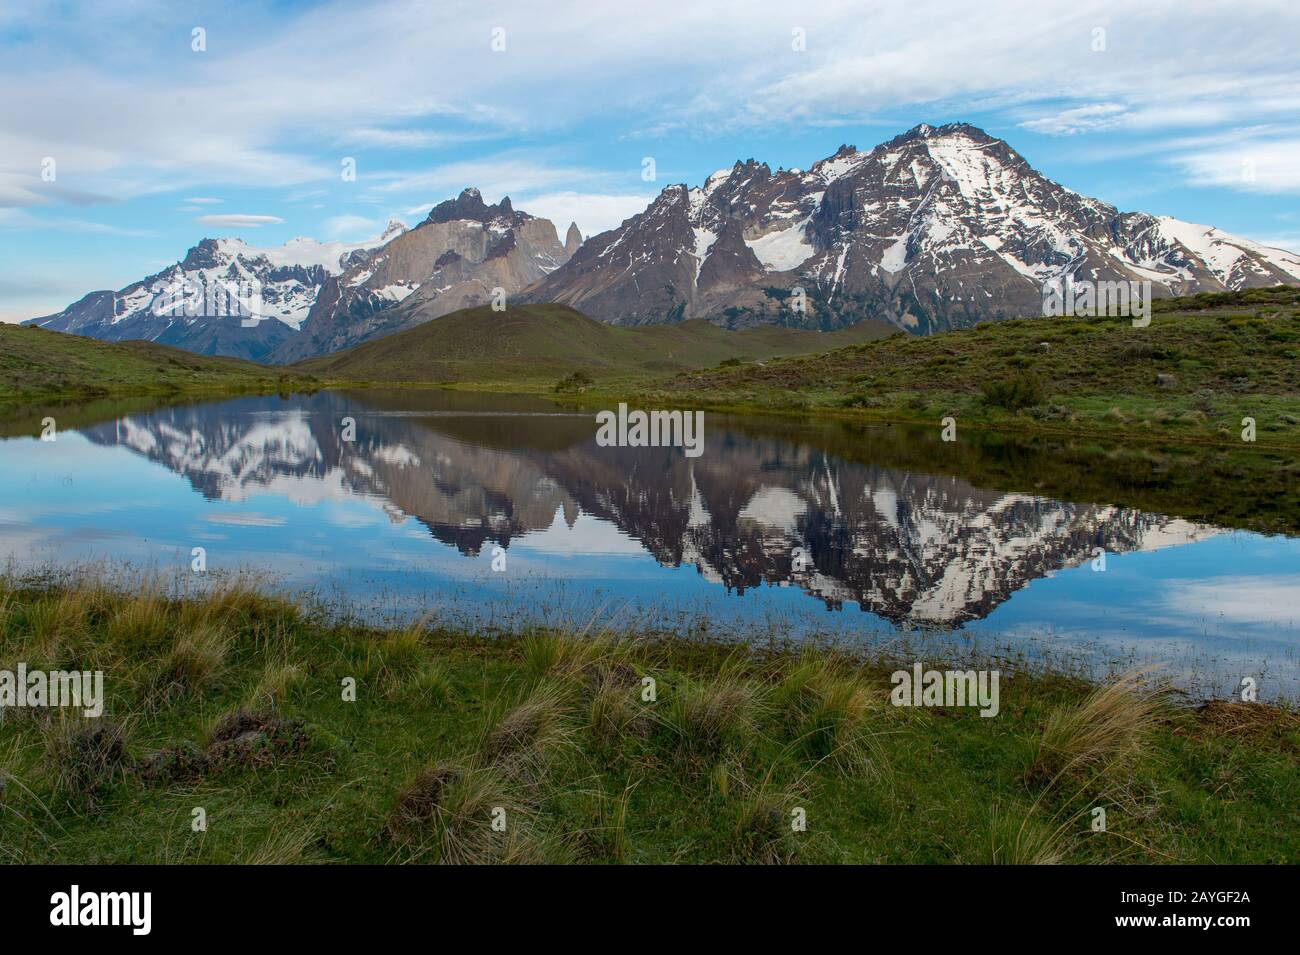 Cuernos del Paine and Almirante Nieto Mountains reflecting in small lake in Torres del Paine National Park in Patagonia, Chile. Stock Photo